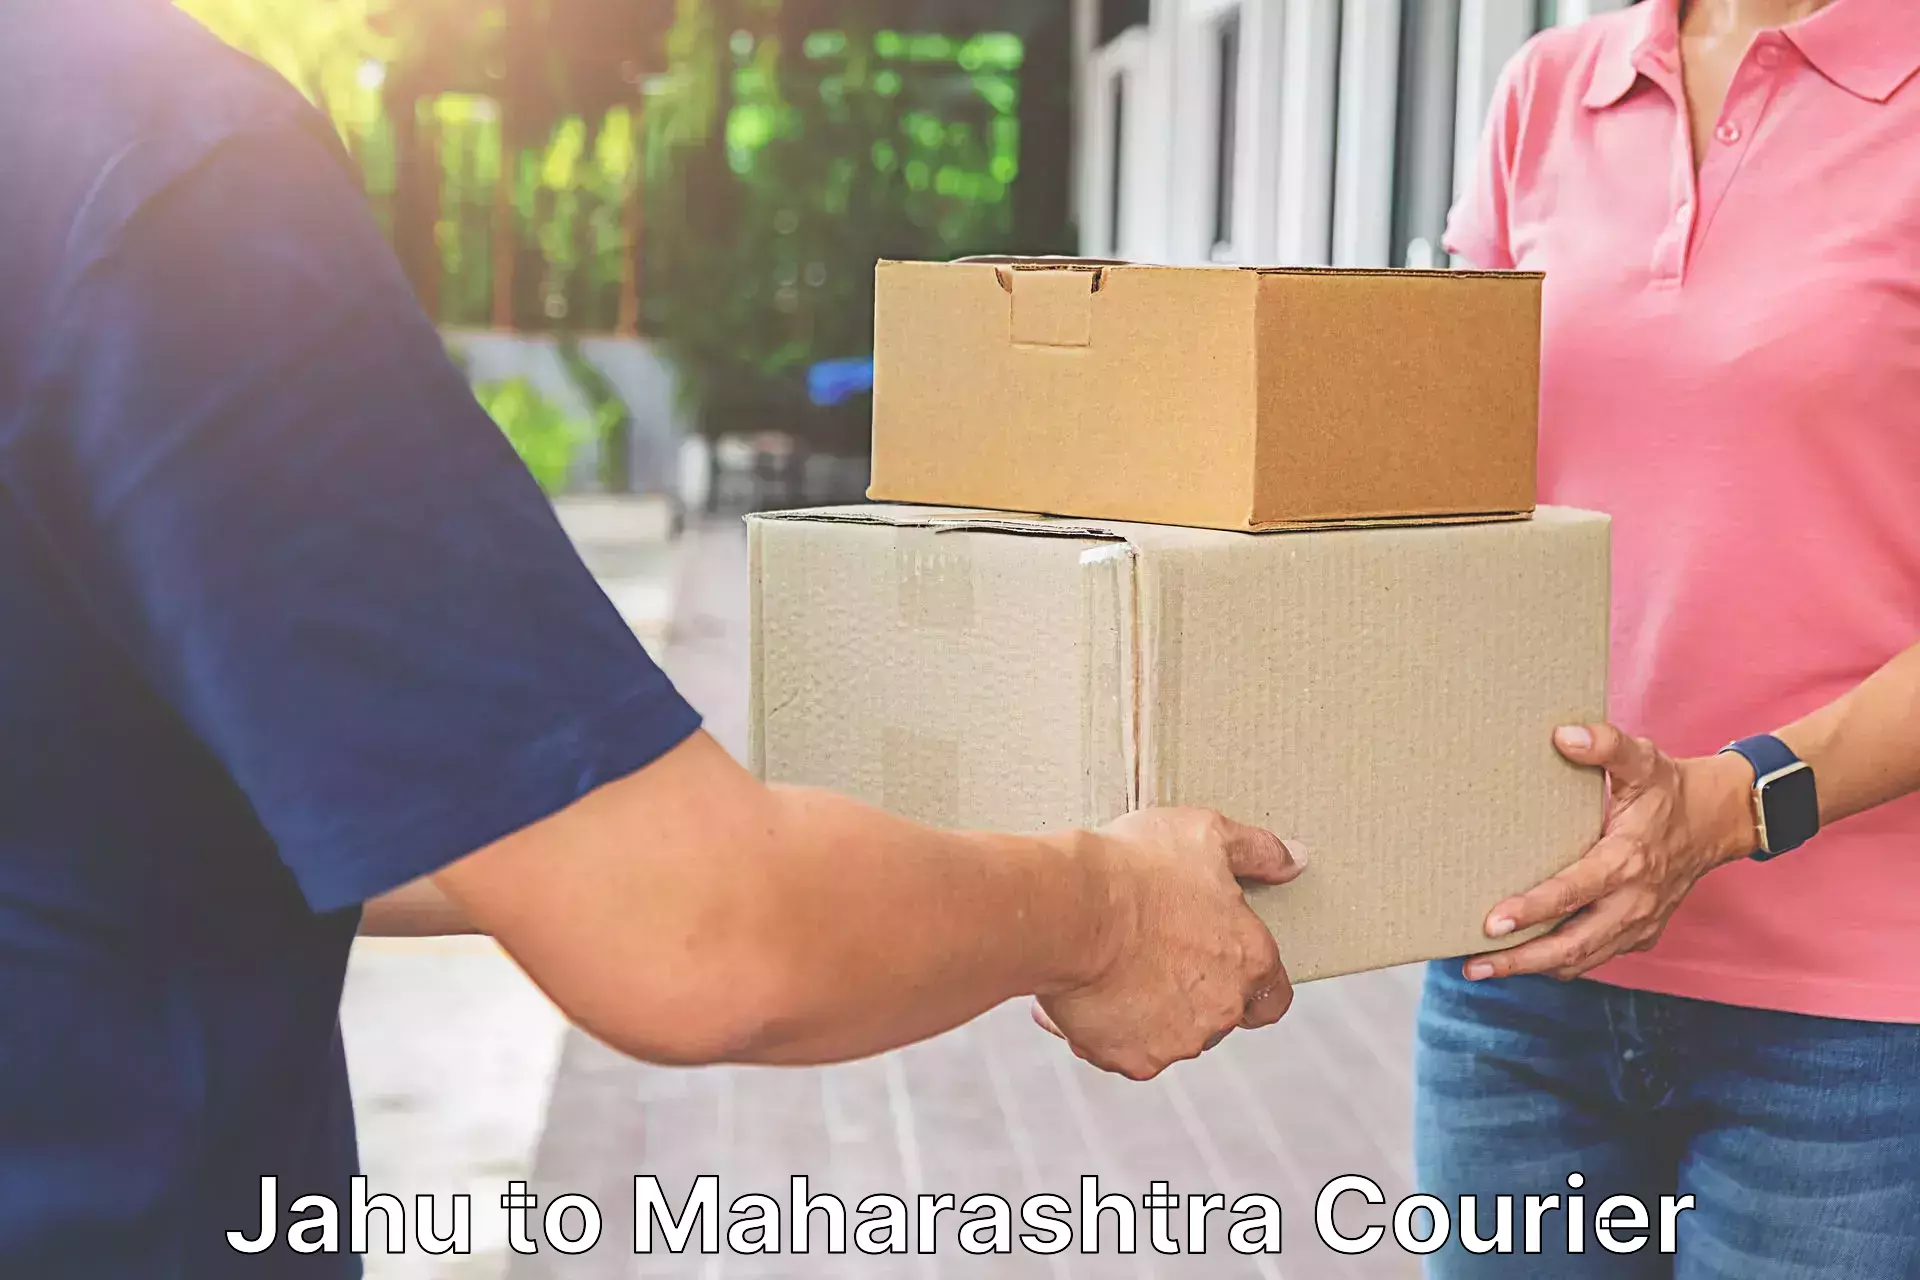 Customizable delivery plans Jahu to Ulhasnagar